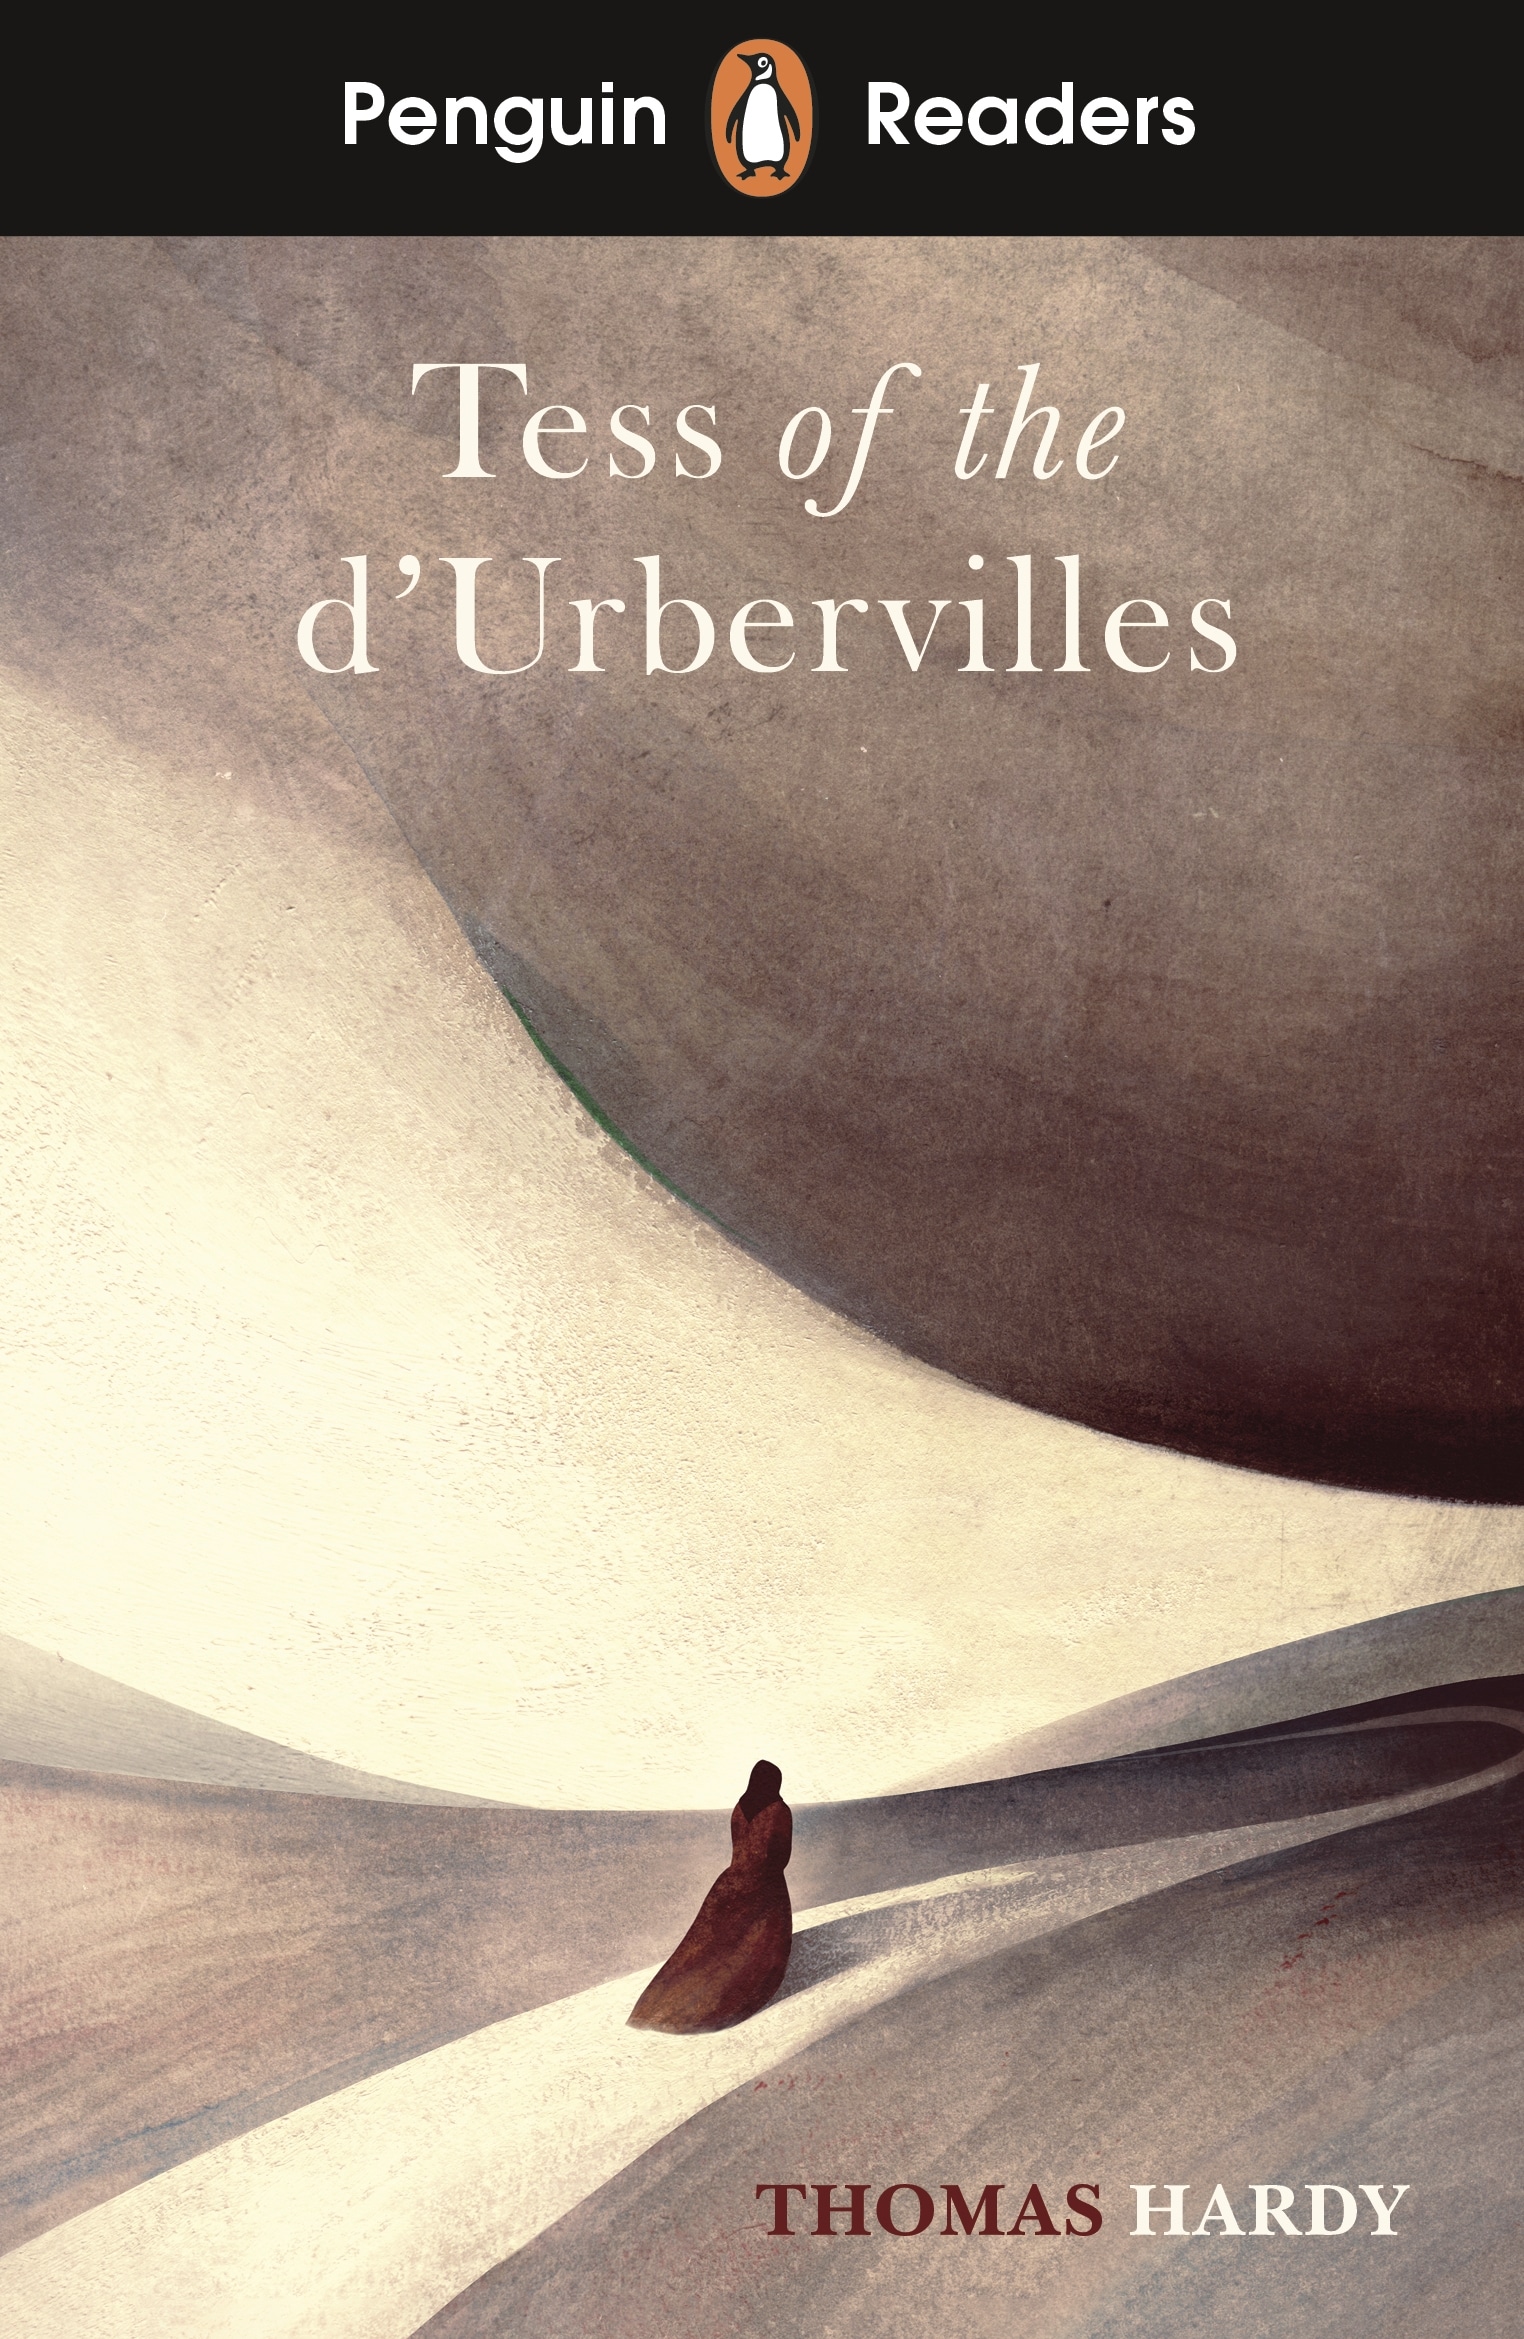 Book “Penguin Readers Level 6: Tess of the D'Urbervilles (ELT Graded Reader)” by Thomas Hardy — April 7, 2022